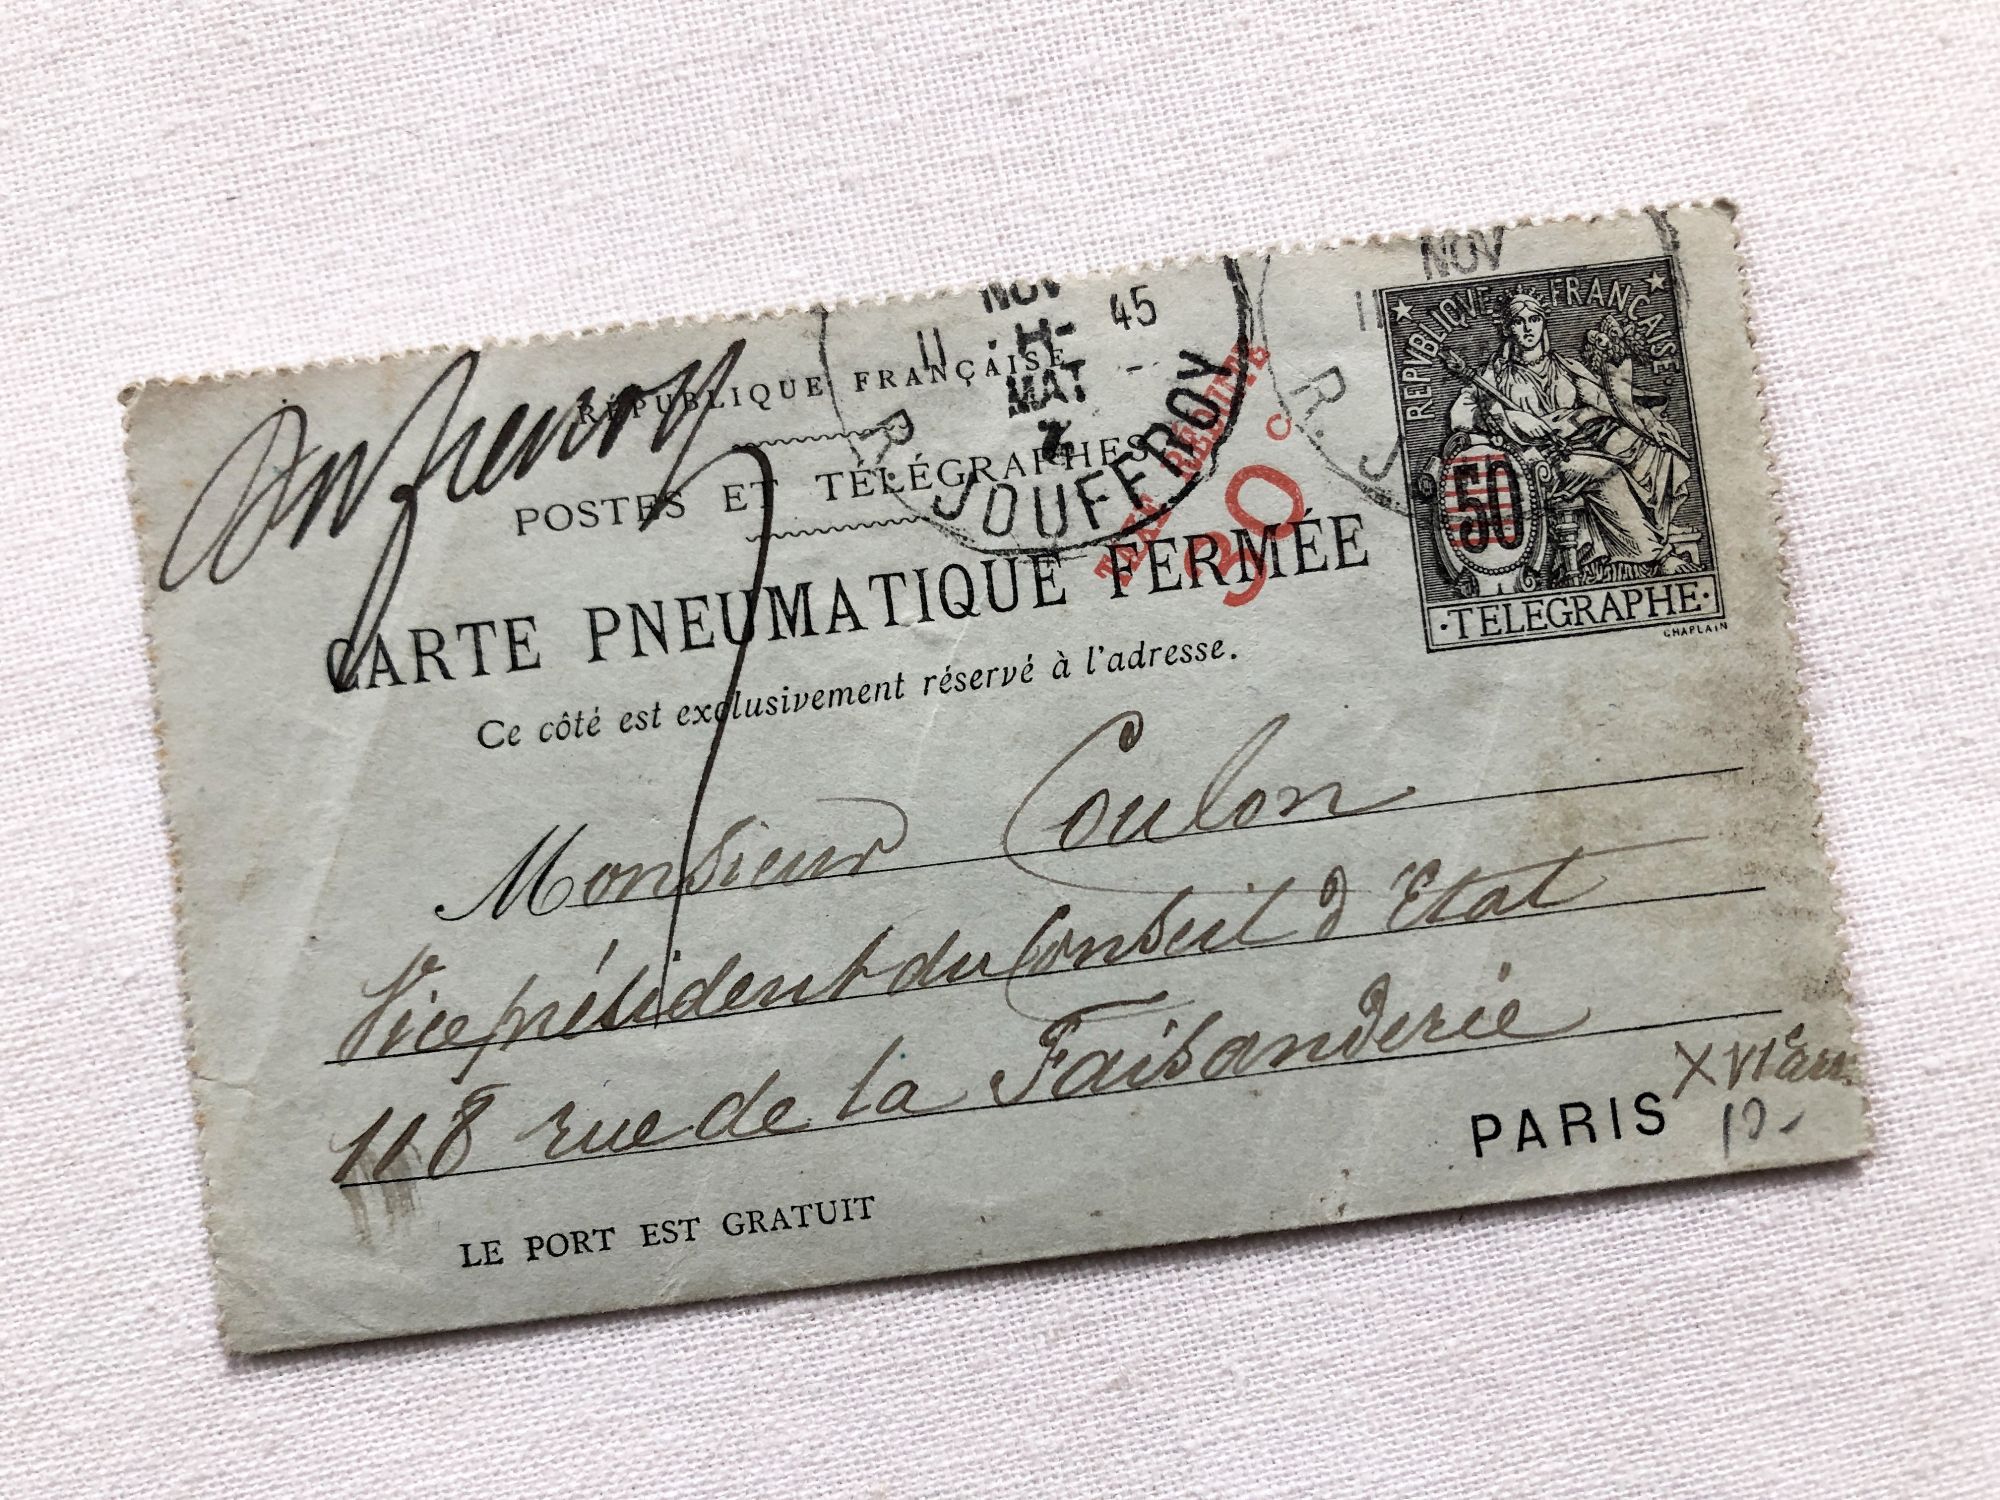 Telegram addressed to Georges Coulon Vice-President of the French Council of State from 1898 to 1912.